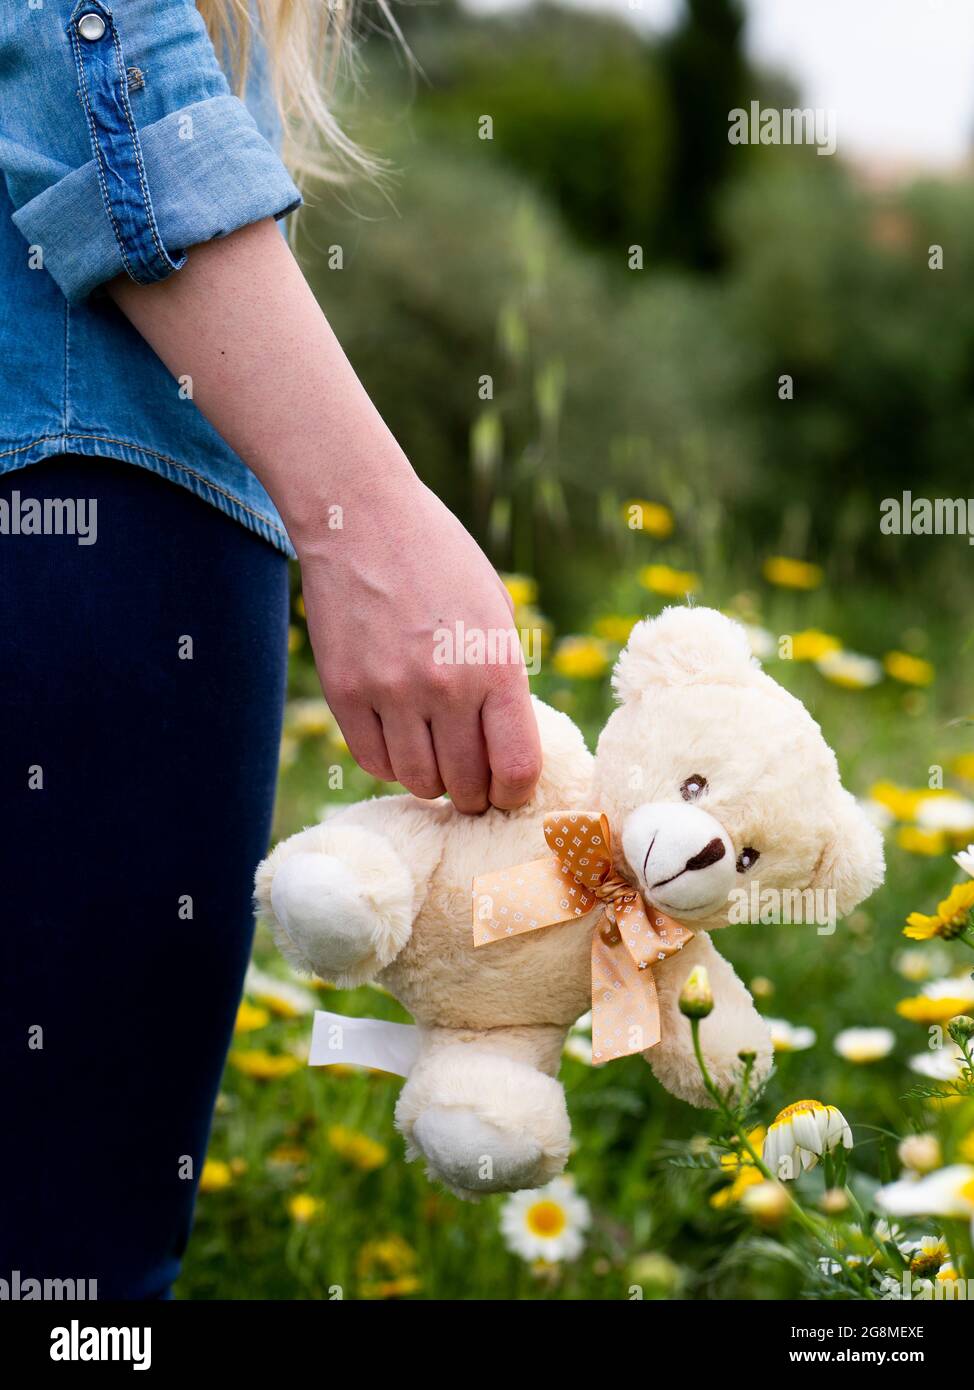 Book cover concept - Childhood / Motherhood - Woman carrying teddy bear outdoors in nature Stock Photo